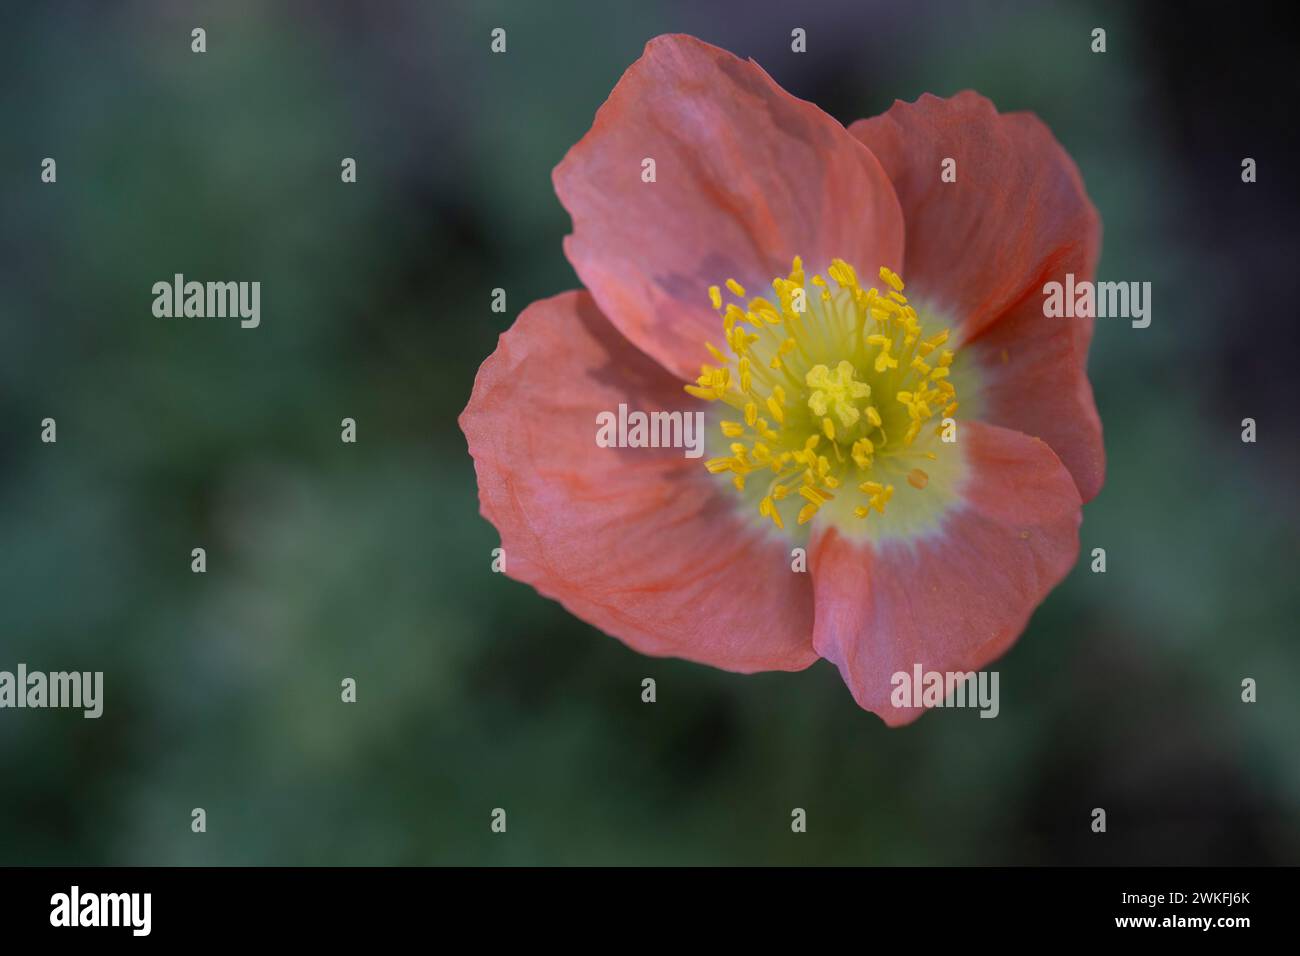 Iceland Poppy, Arctic Poppy, Papaver nudicuale,  flowering in cottage garden, close-up, macro shot, detailed Stock Photo